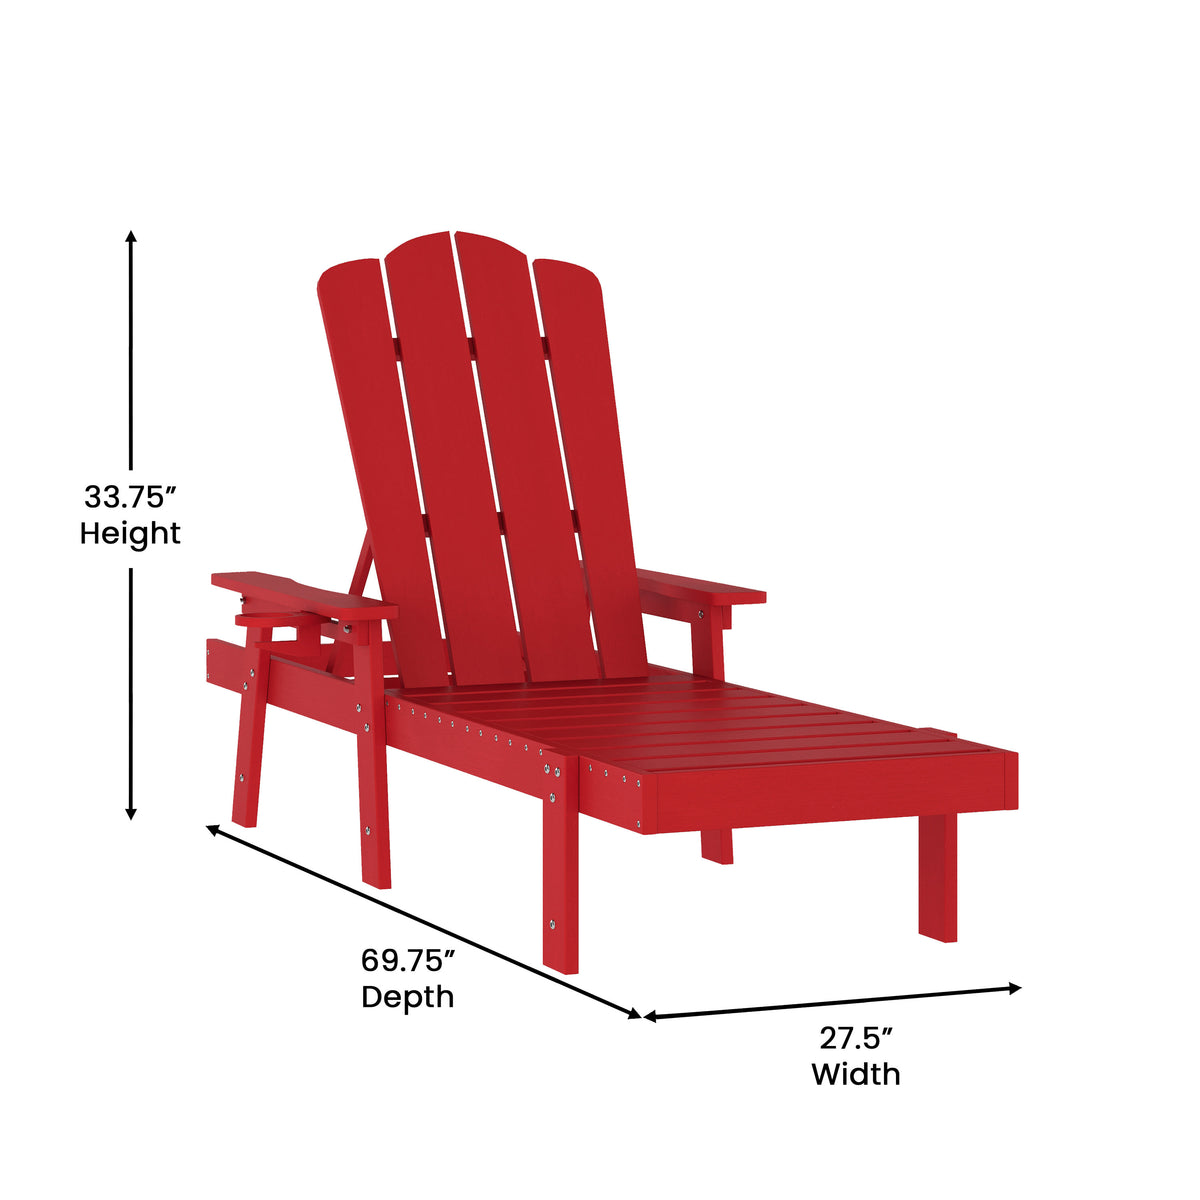 Red |#| 3pc Commercial Indoor/Outdoor Adirondack Set with 2 Loungers, Side Table in Red